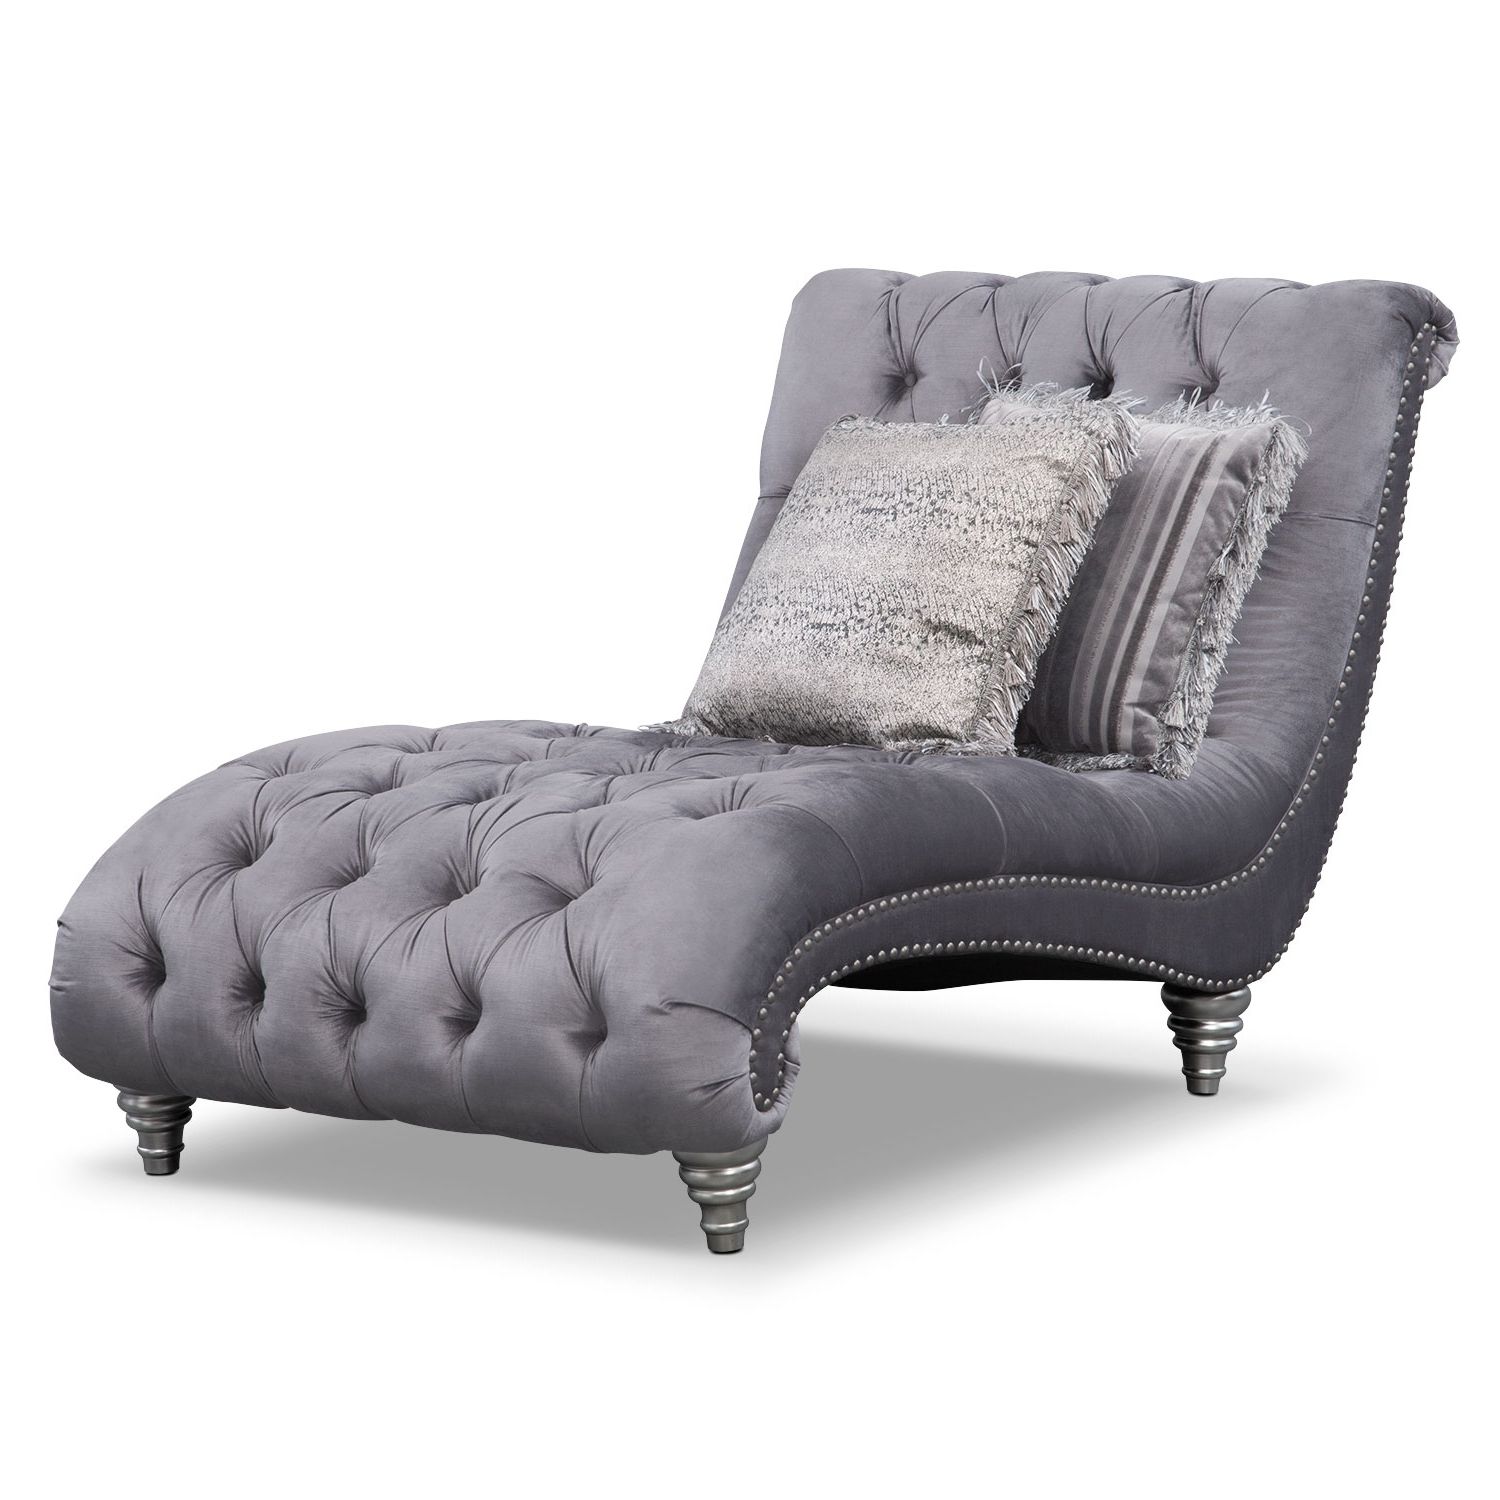 Gray Chaise Lounge Chair • Lounge Chairs Ideas Throughout Preferred Gray Chaise Lounges (View 4 of 15)